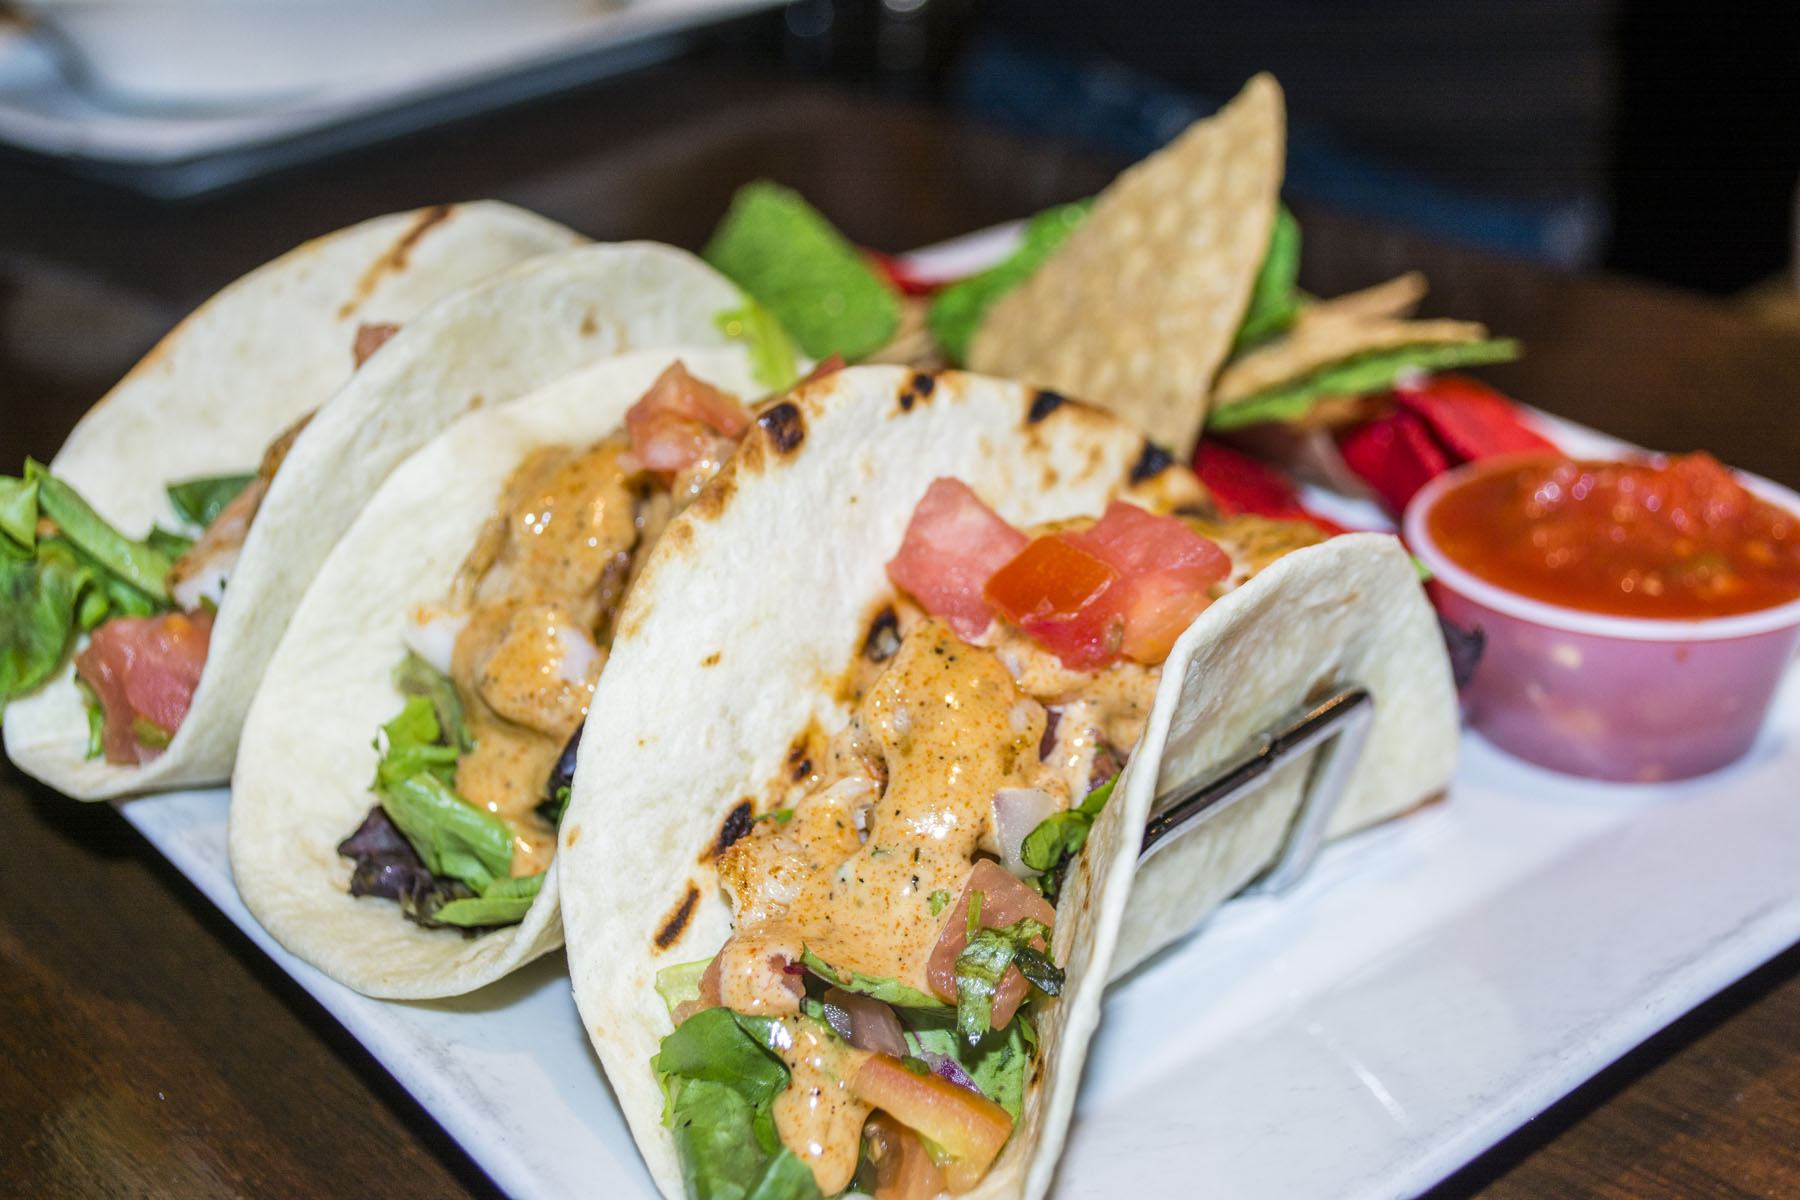   The Shrimp Tacos ($12) feature seasoned grilled shrimp, lettuce, and pico de gallo wrapped in three soft shell tacos.  